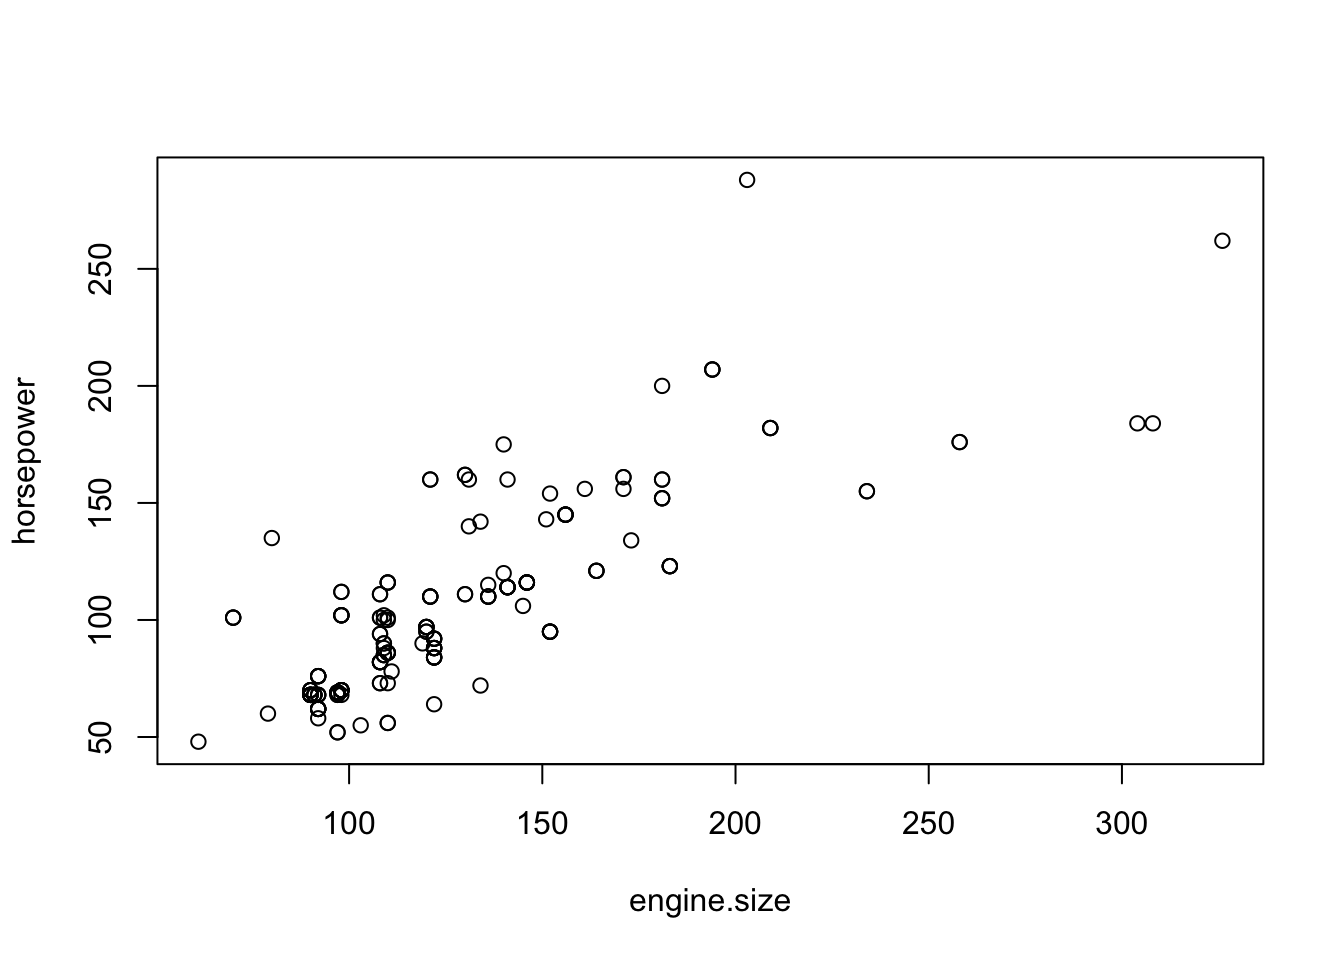 The Scatter Plot of Power versus Engine Size